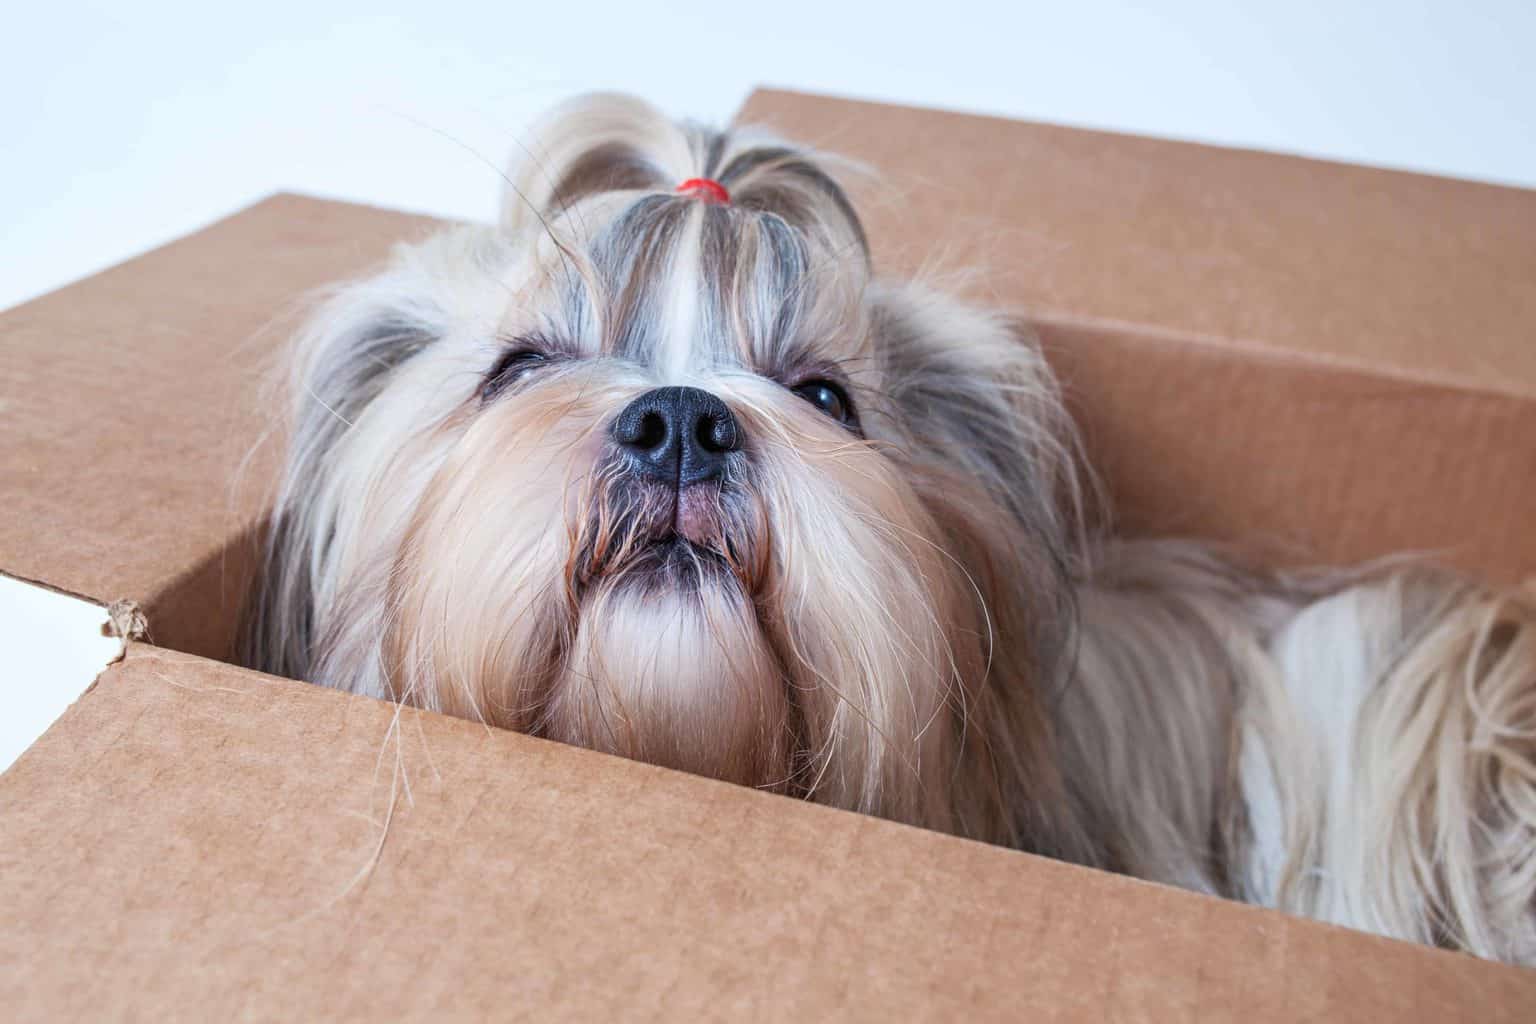 Happy Shih Tzu in box. Choose ideal gifts for new dog owners from dog treats and harnesses to cozy dog beds, teething toys, and portable dog bowls.